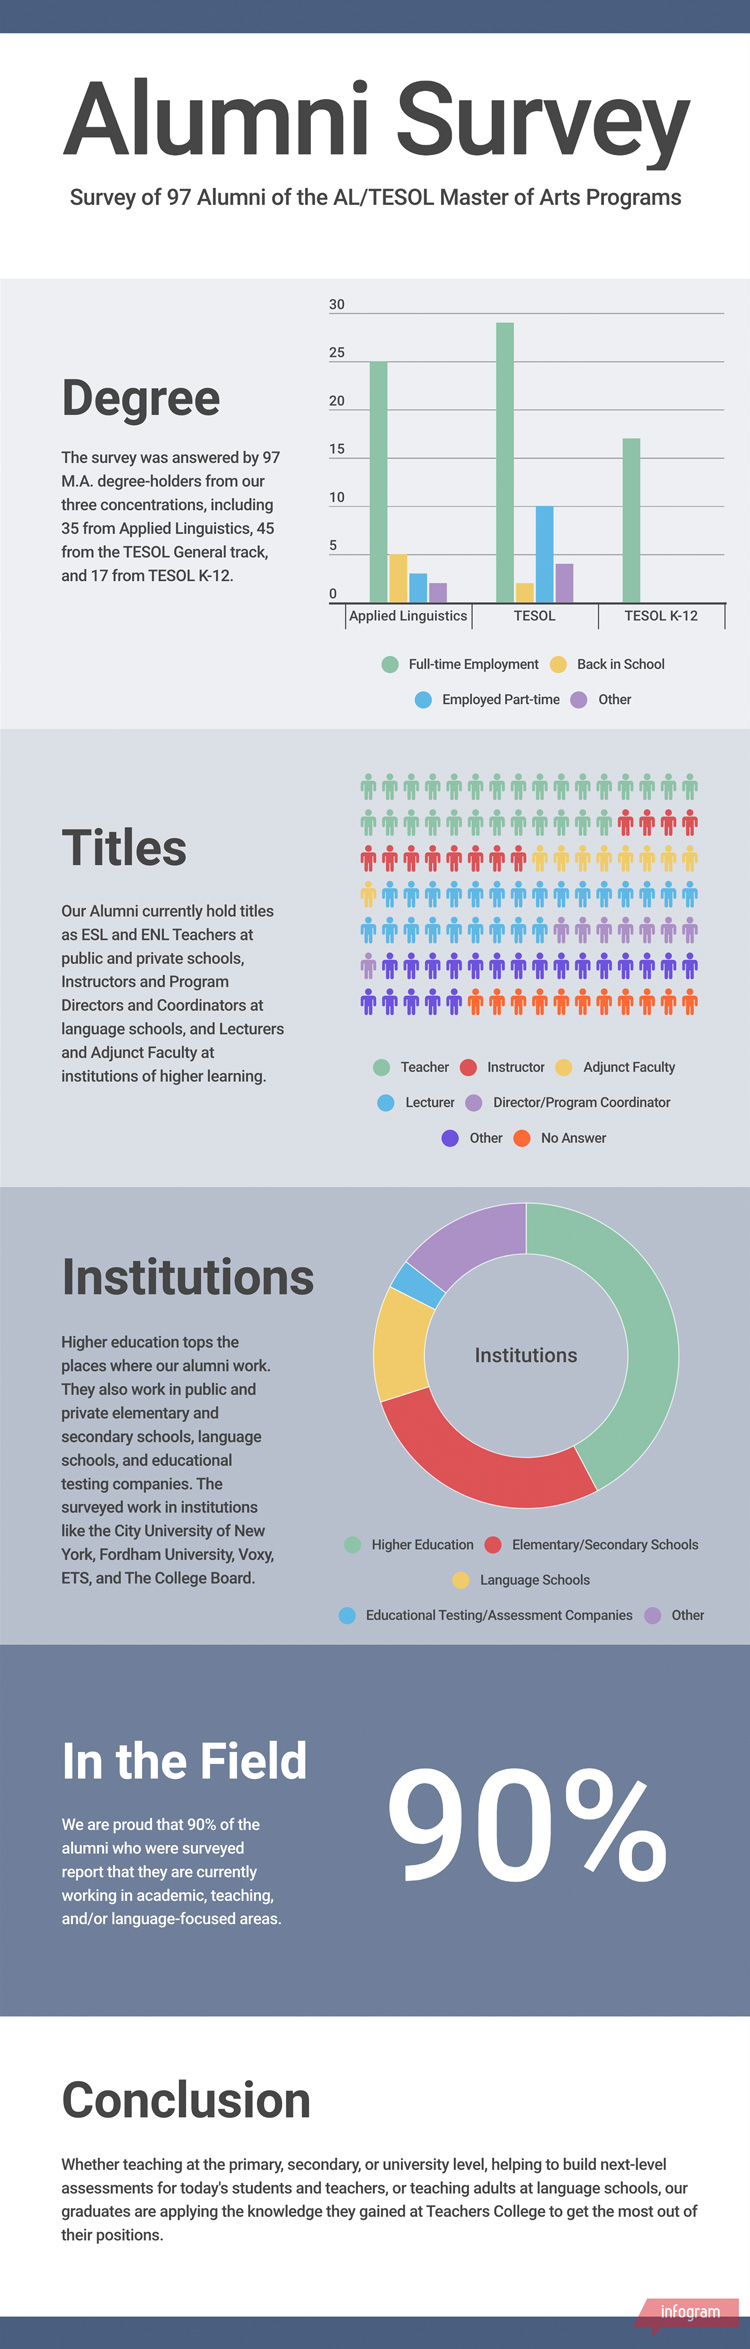 Infographic about AL/TESOL